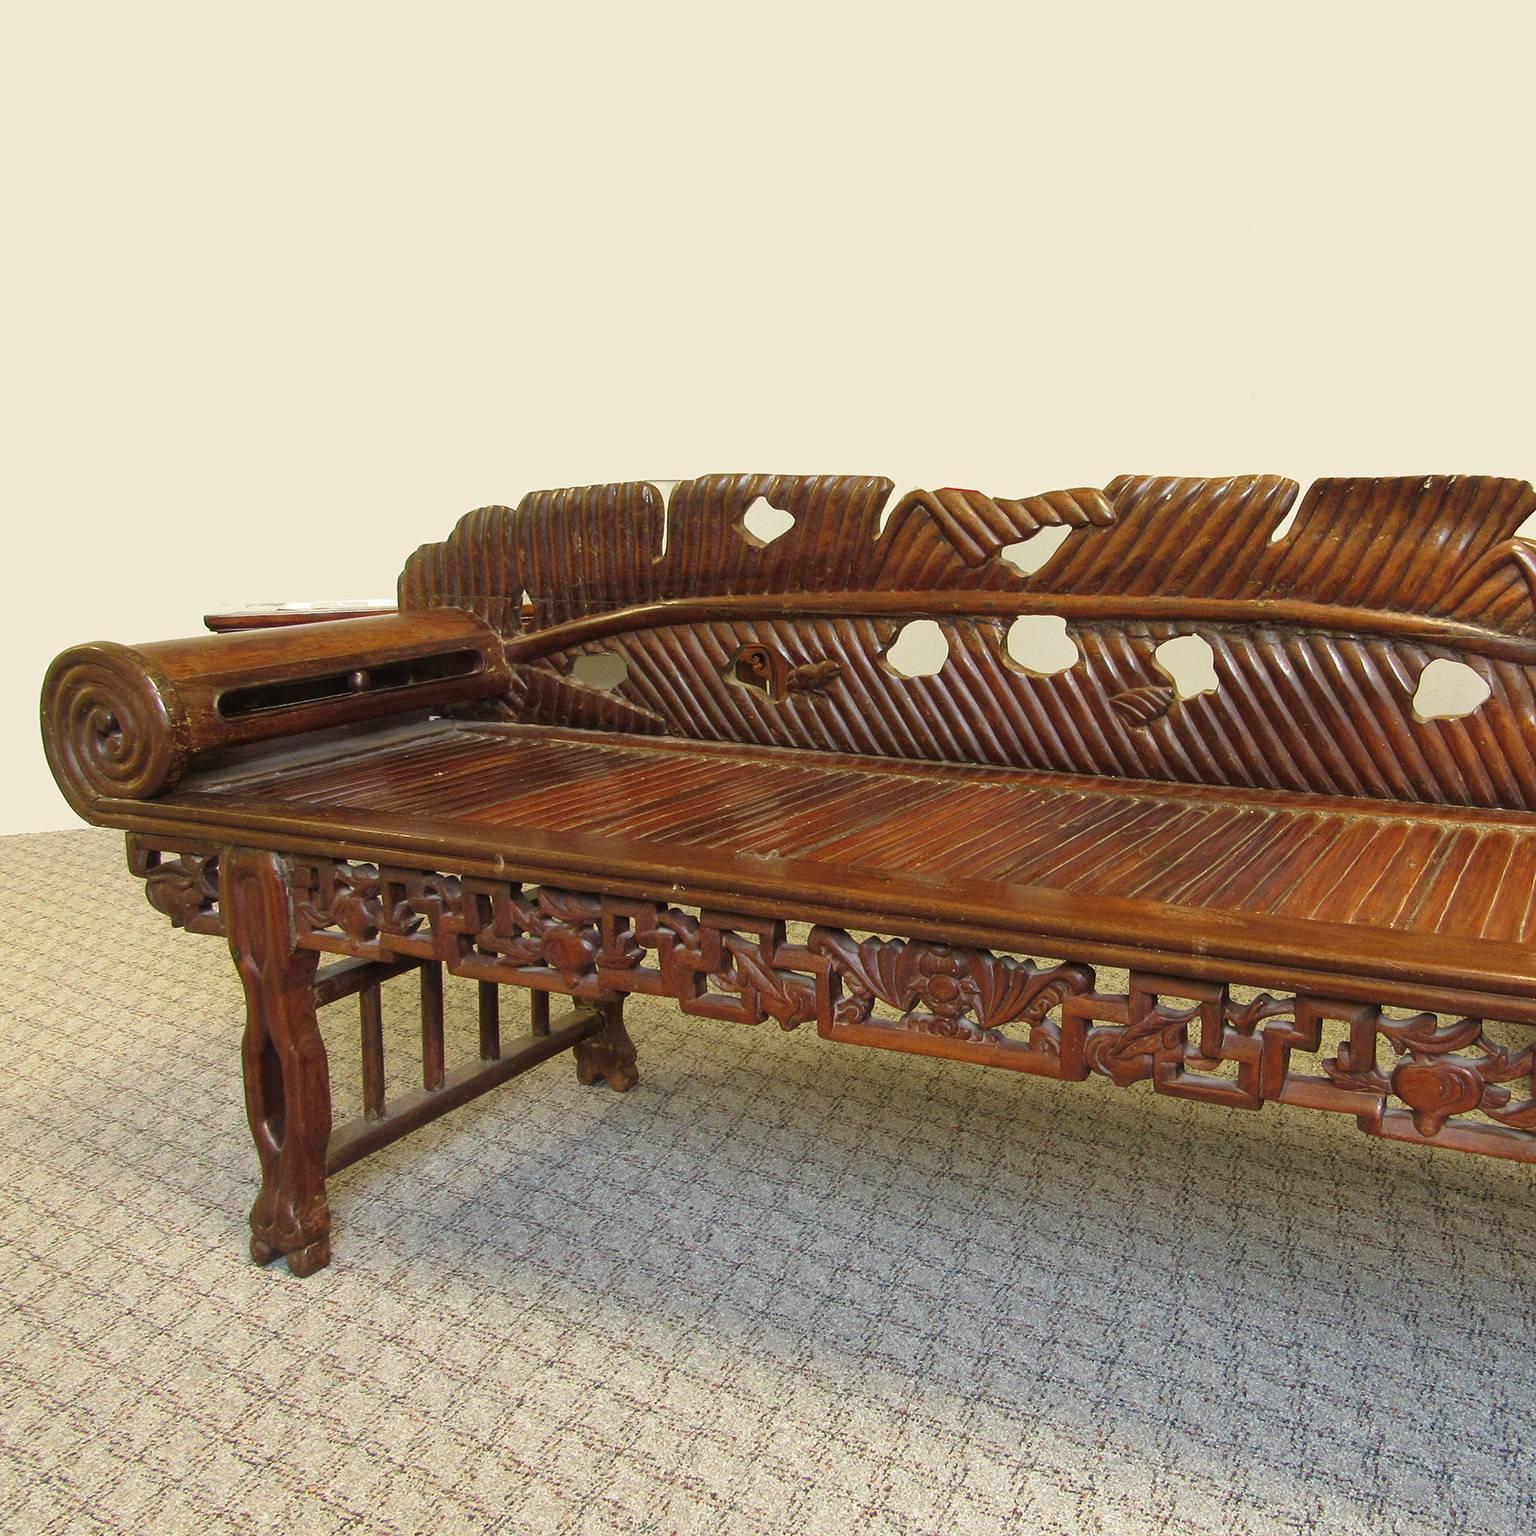 Antique Asian carved hardwood scroll arm chaise, late 19th to early 20th century. With palm frond back, and oranate pierced fretwork rased on twisting vine legs.
Overall height: 29 1/2 inches, seat height: 17 3/4 inches, length: 69 inches, depth: